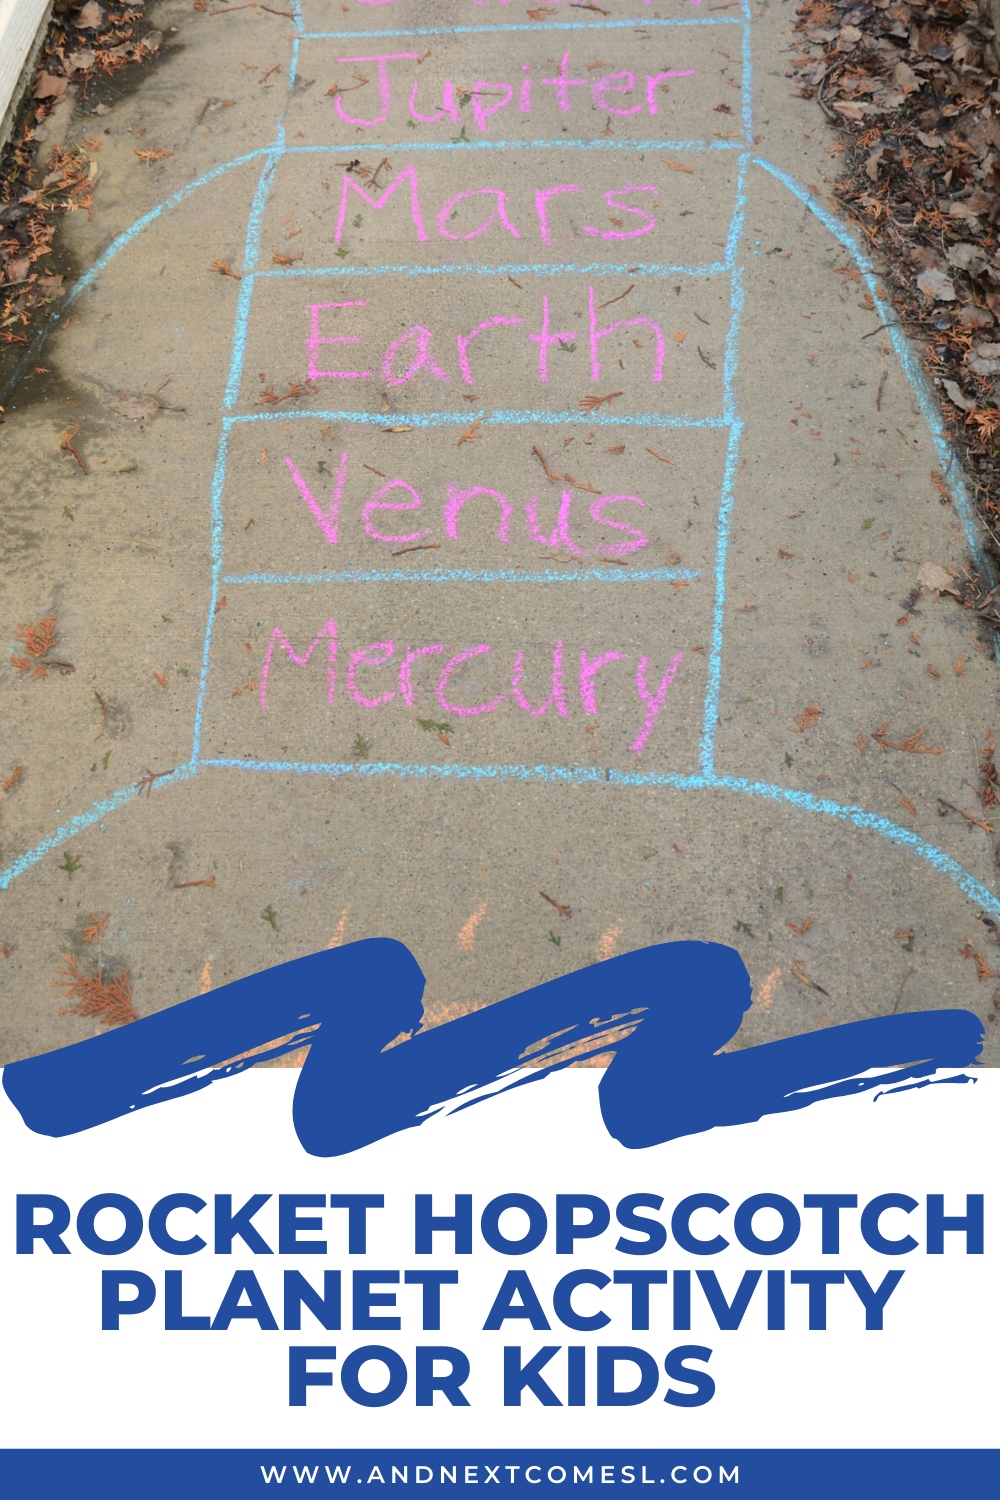 Rocket hopscotch planet activity for kids - a great way to get kids moving while learning about the order of the planets in our solar system